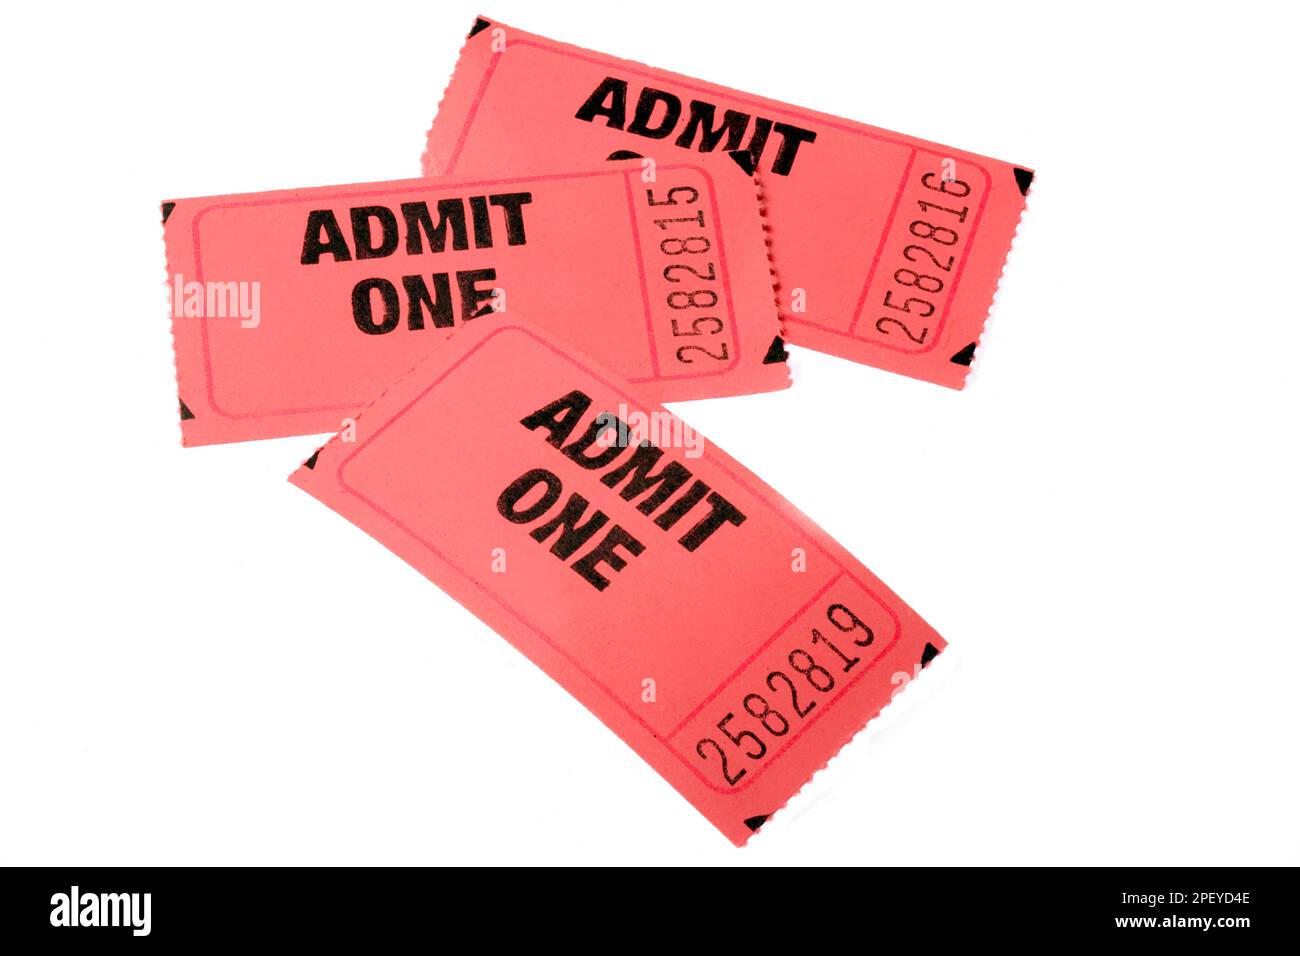 Three Admission tickets on a white background Stock Photo